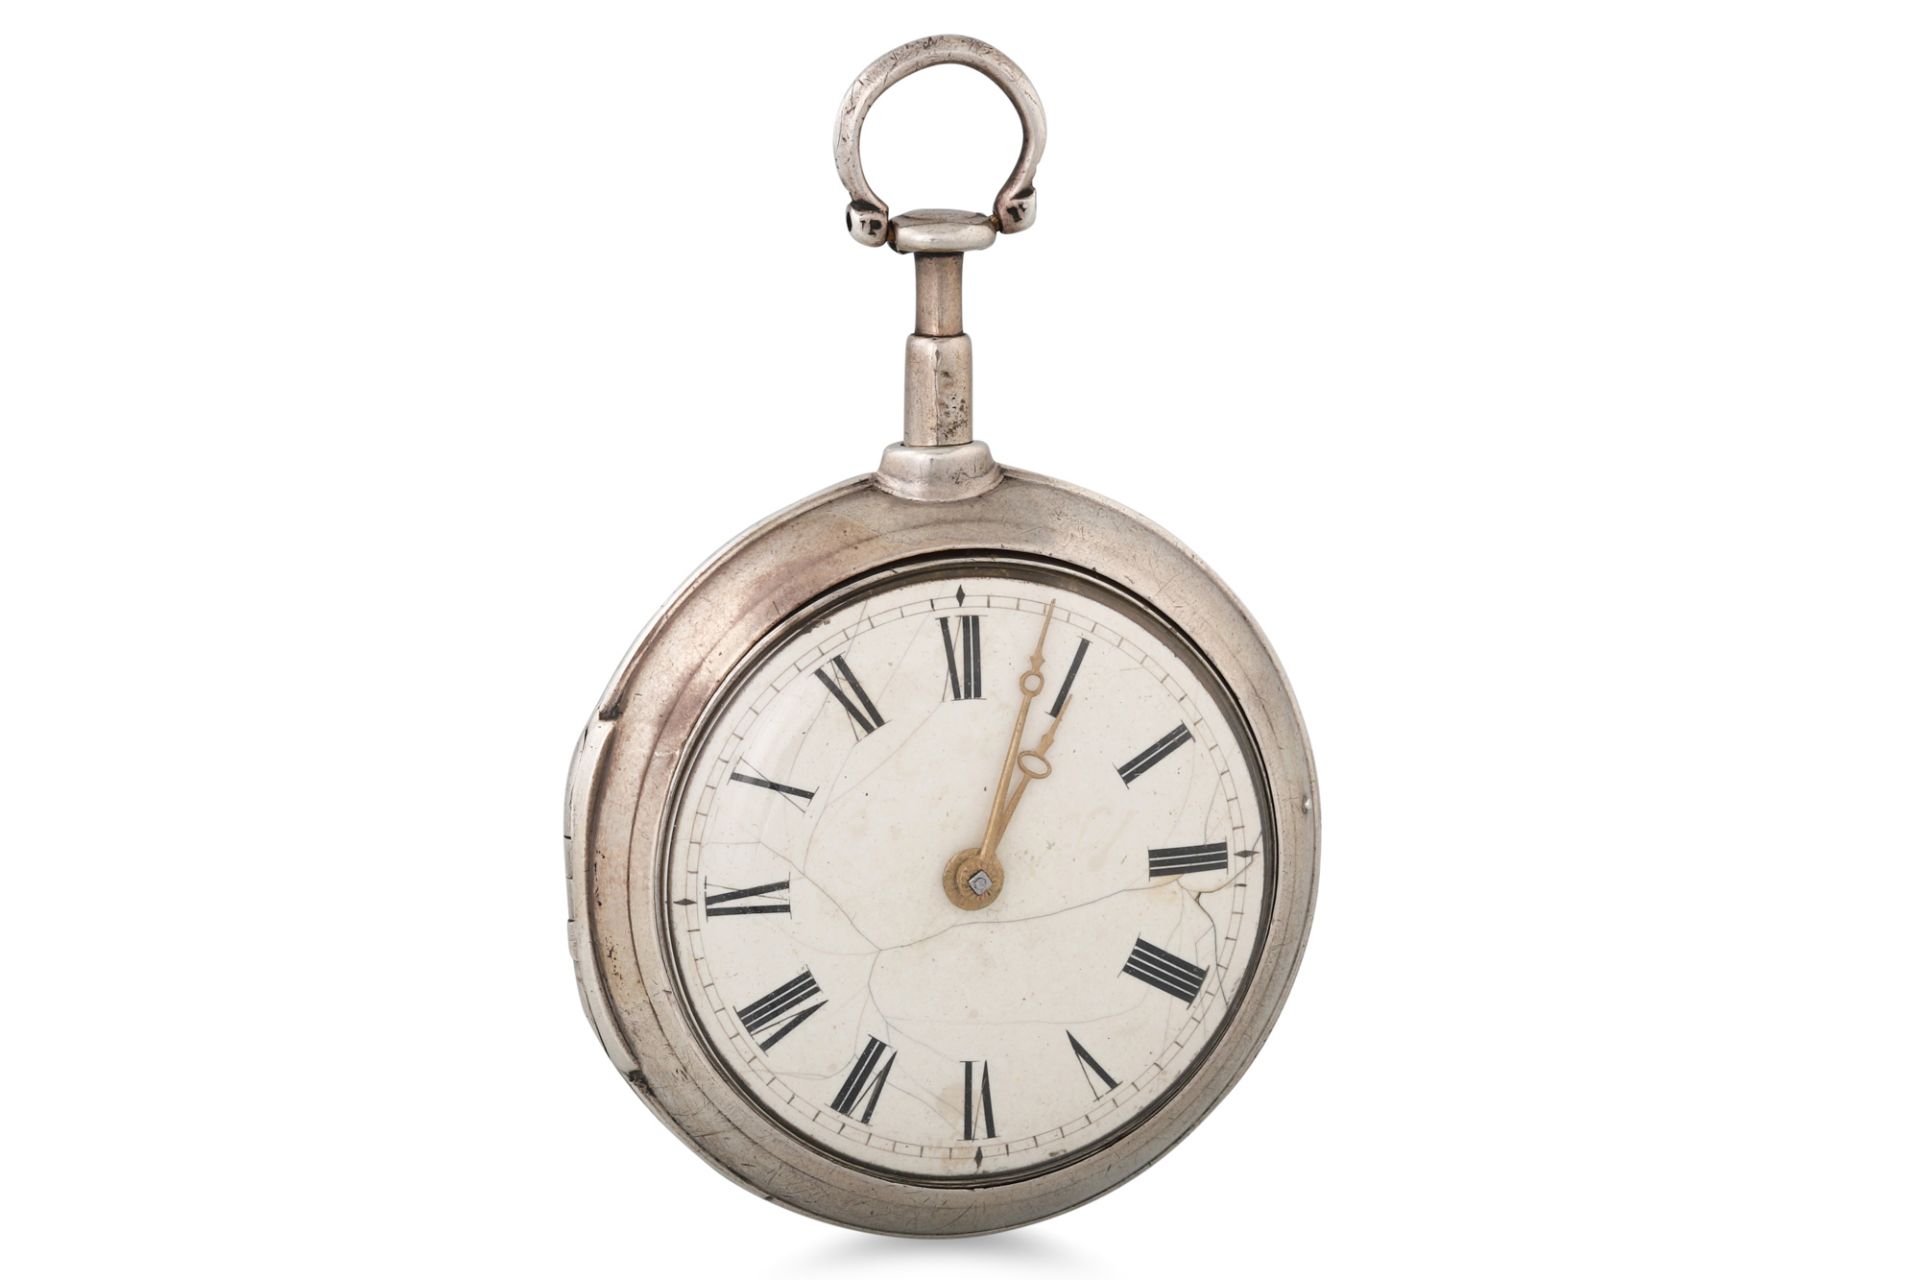 A GEORGE III IRISH SILVER POCKET WATCH, fusee movement, white enamel dial with Roman numerals, by - Image 2 of 3